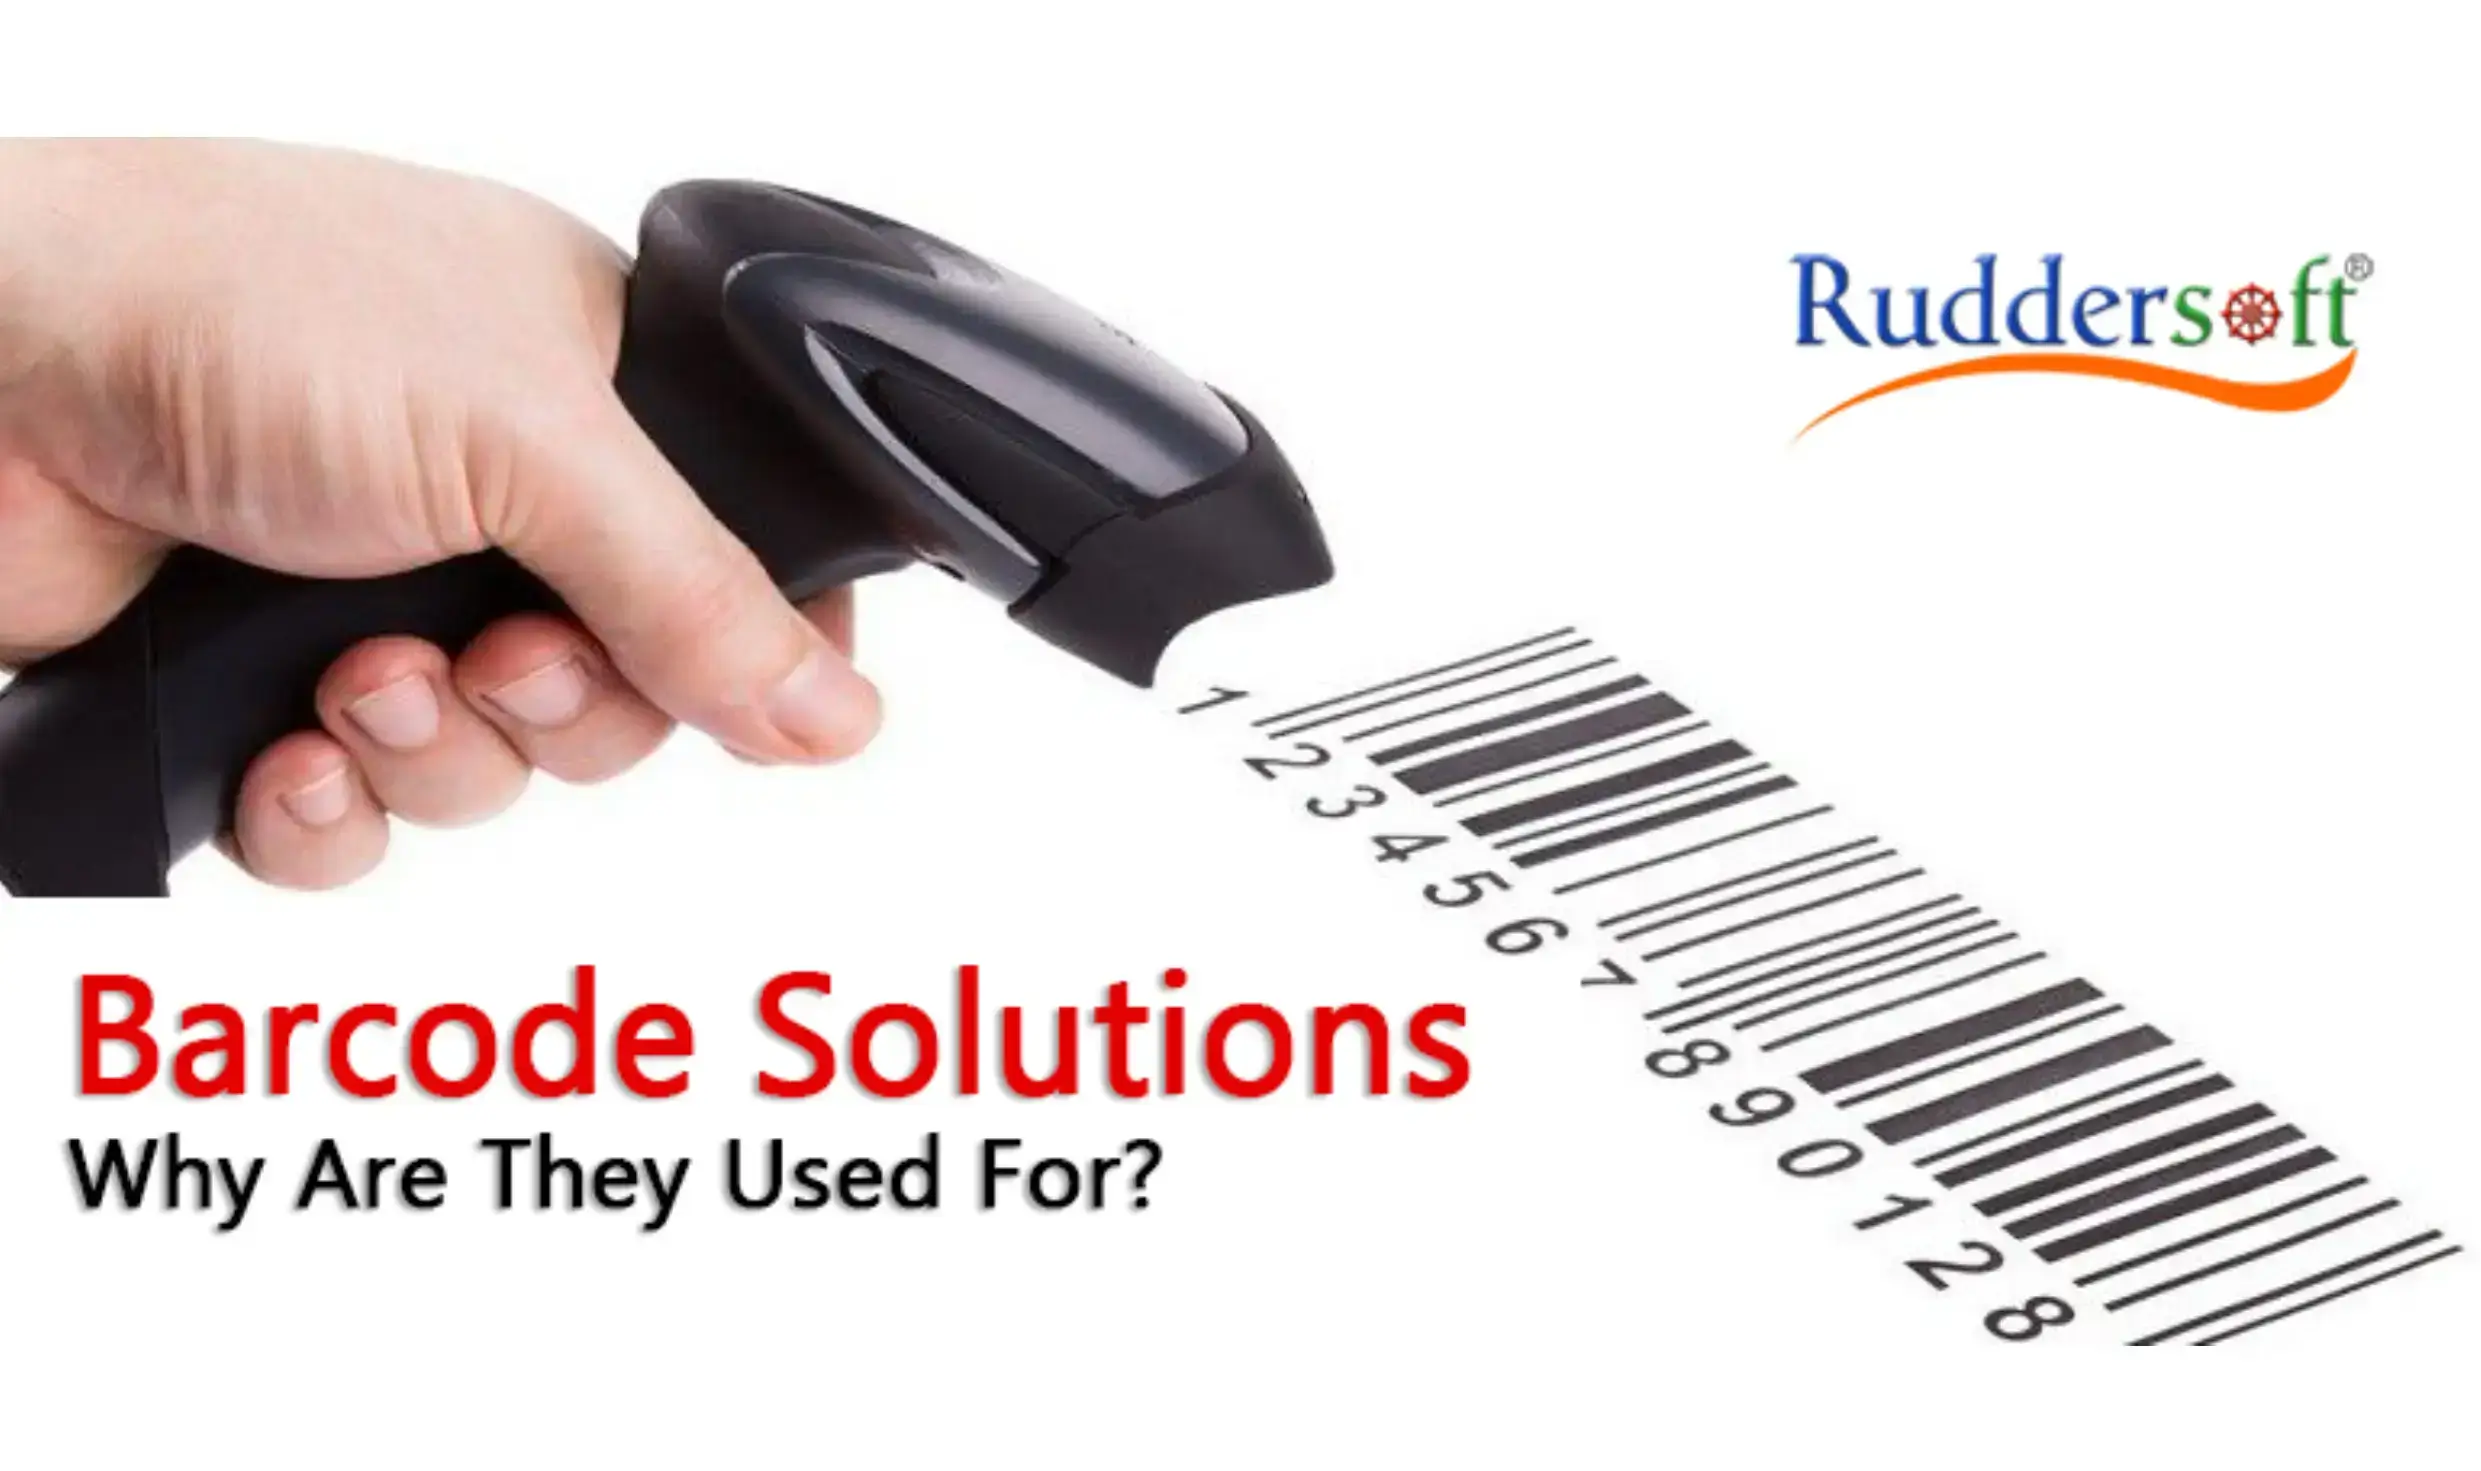 Barcode Solutions - Why Are They Used For?